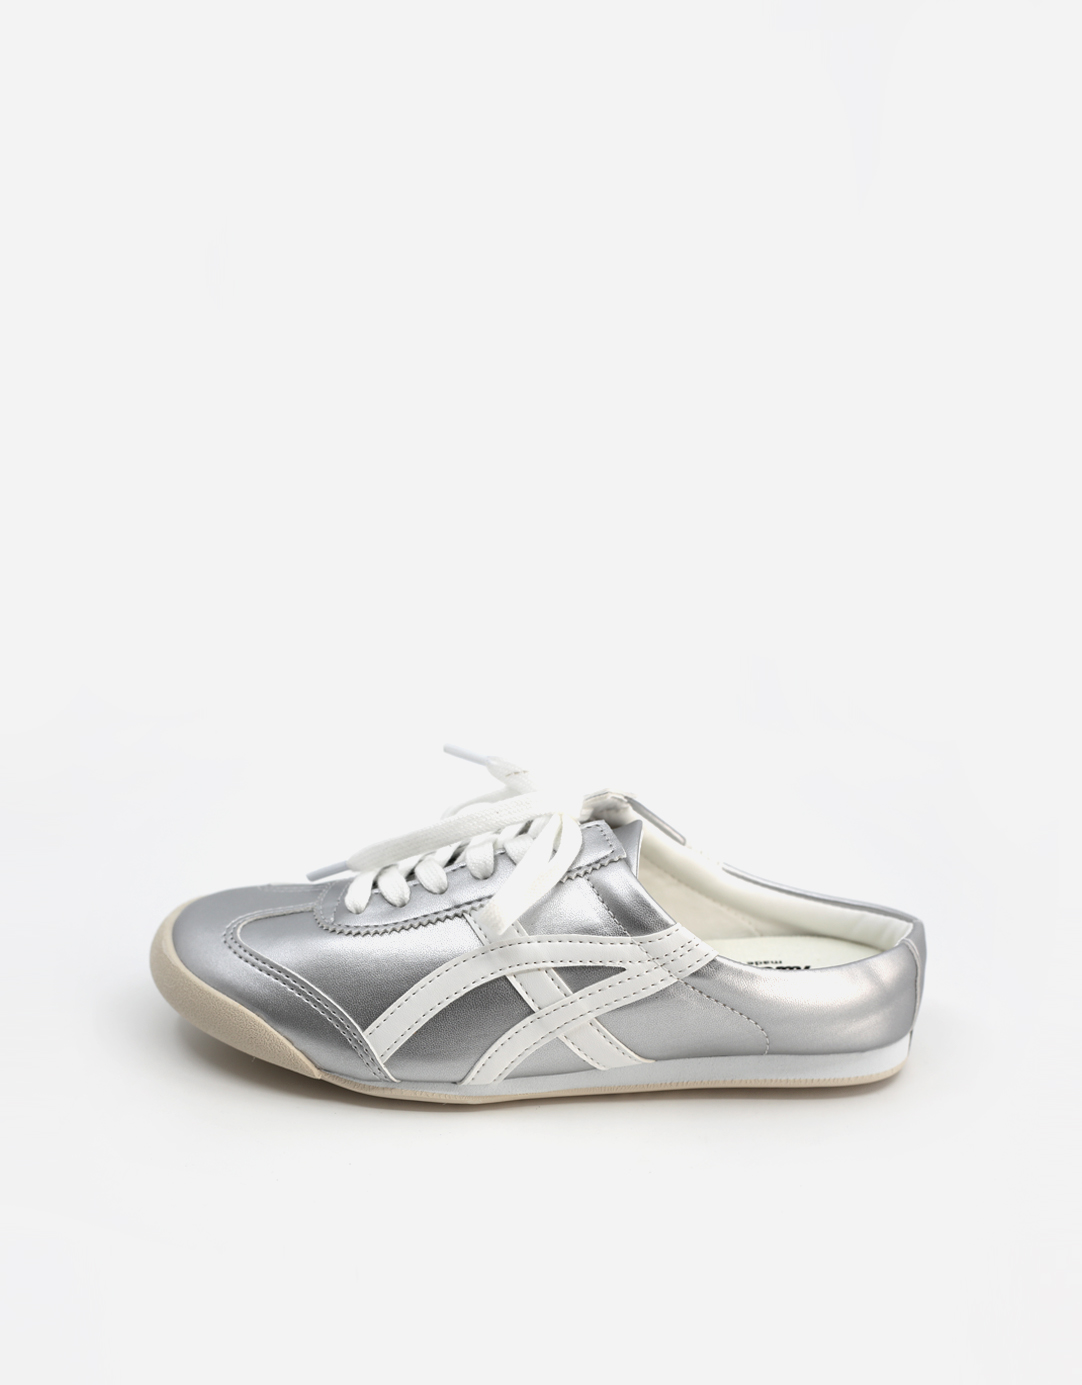 MEXICO SILVER MULE SNEAKERS